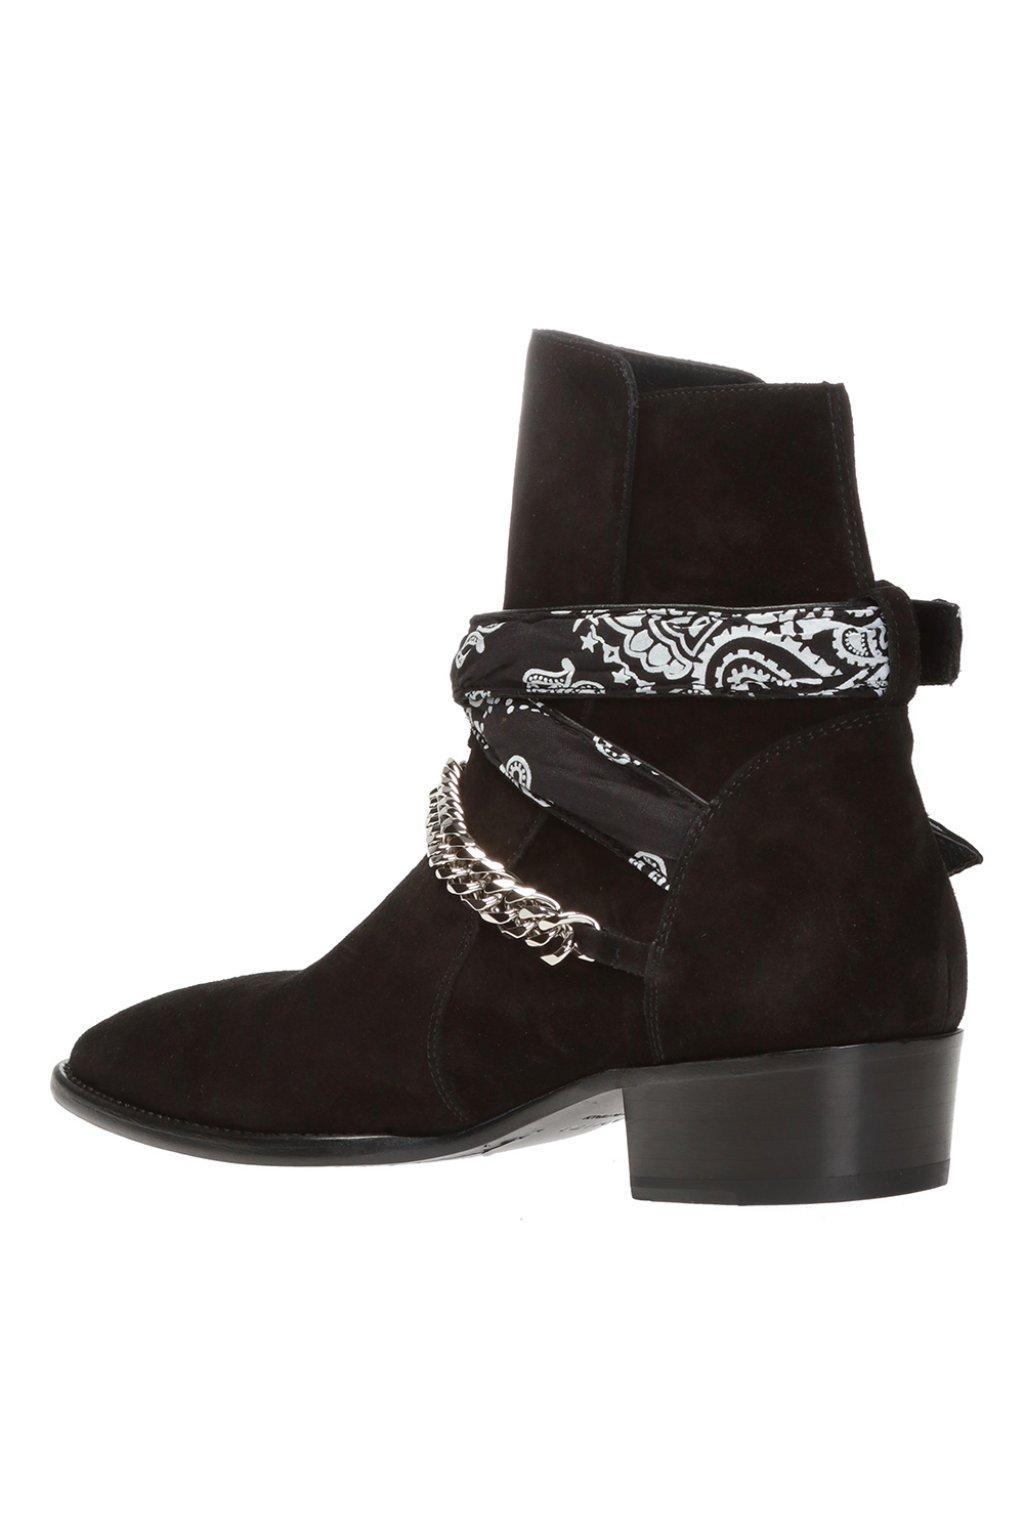 Amiri Leather Paisley Ankle Boots in Black for Men - Lyst